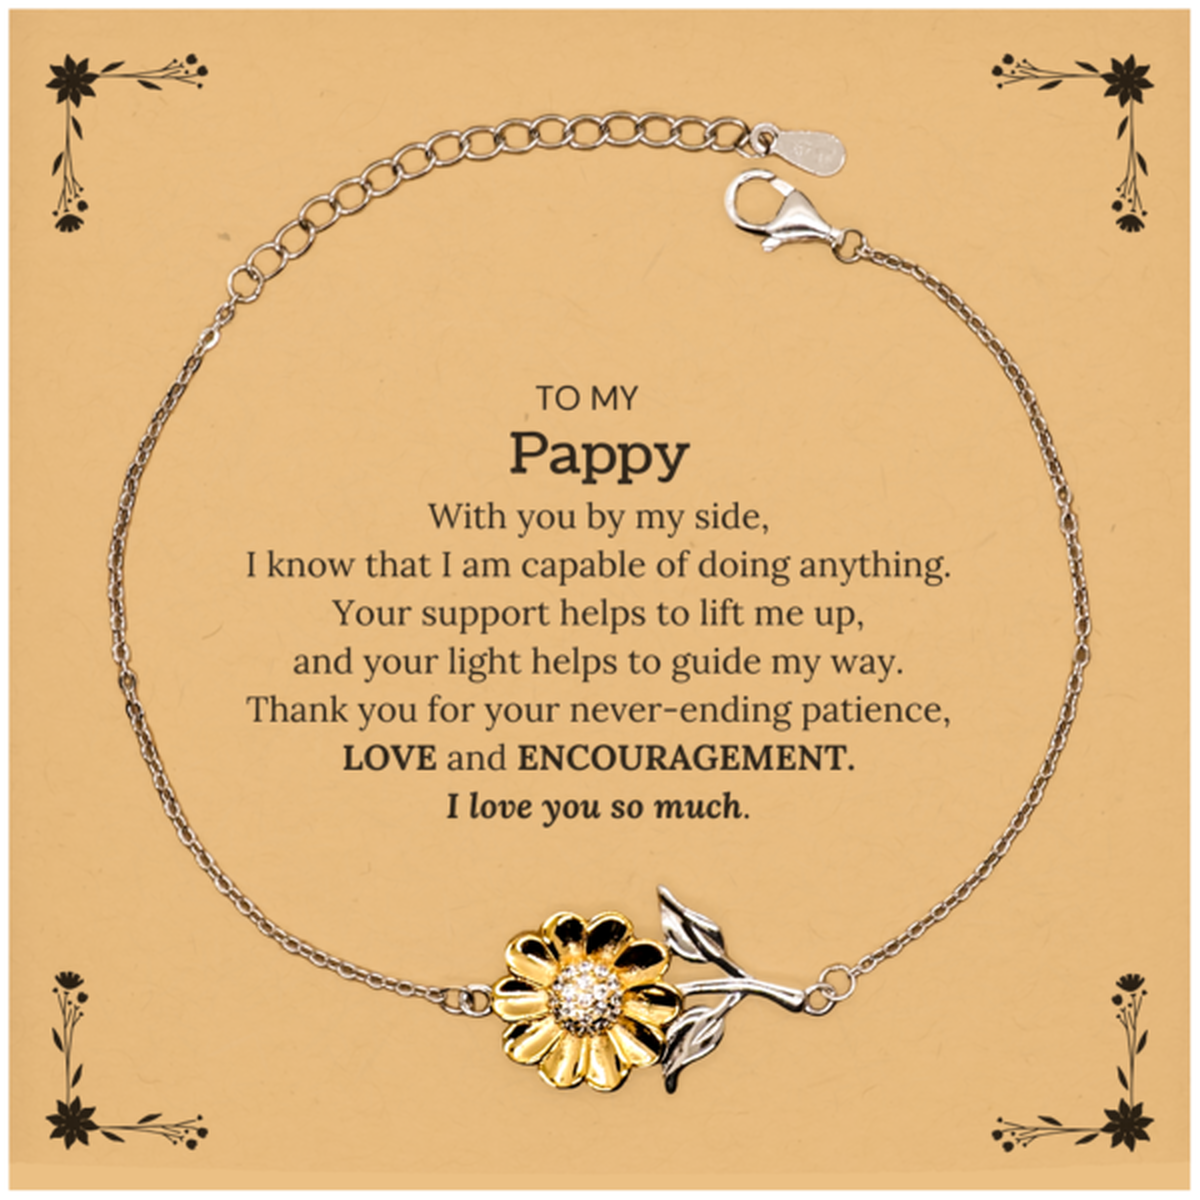 Appreciation Pappy Sunflower Bracelet Gifts, To My Pappy Birthday Christmas Wedding Keepsake Gifts for Pappy With you by my side, I know that I am capable of doing anything. I love you so much